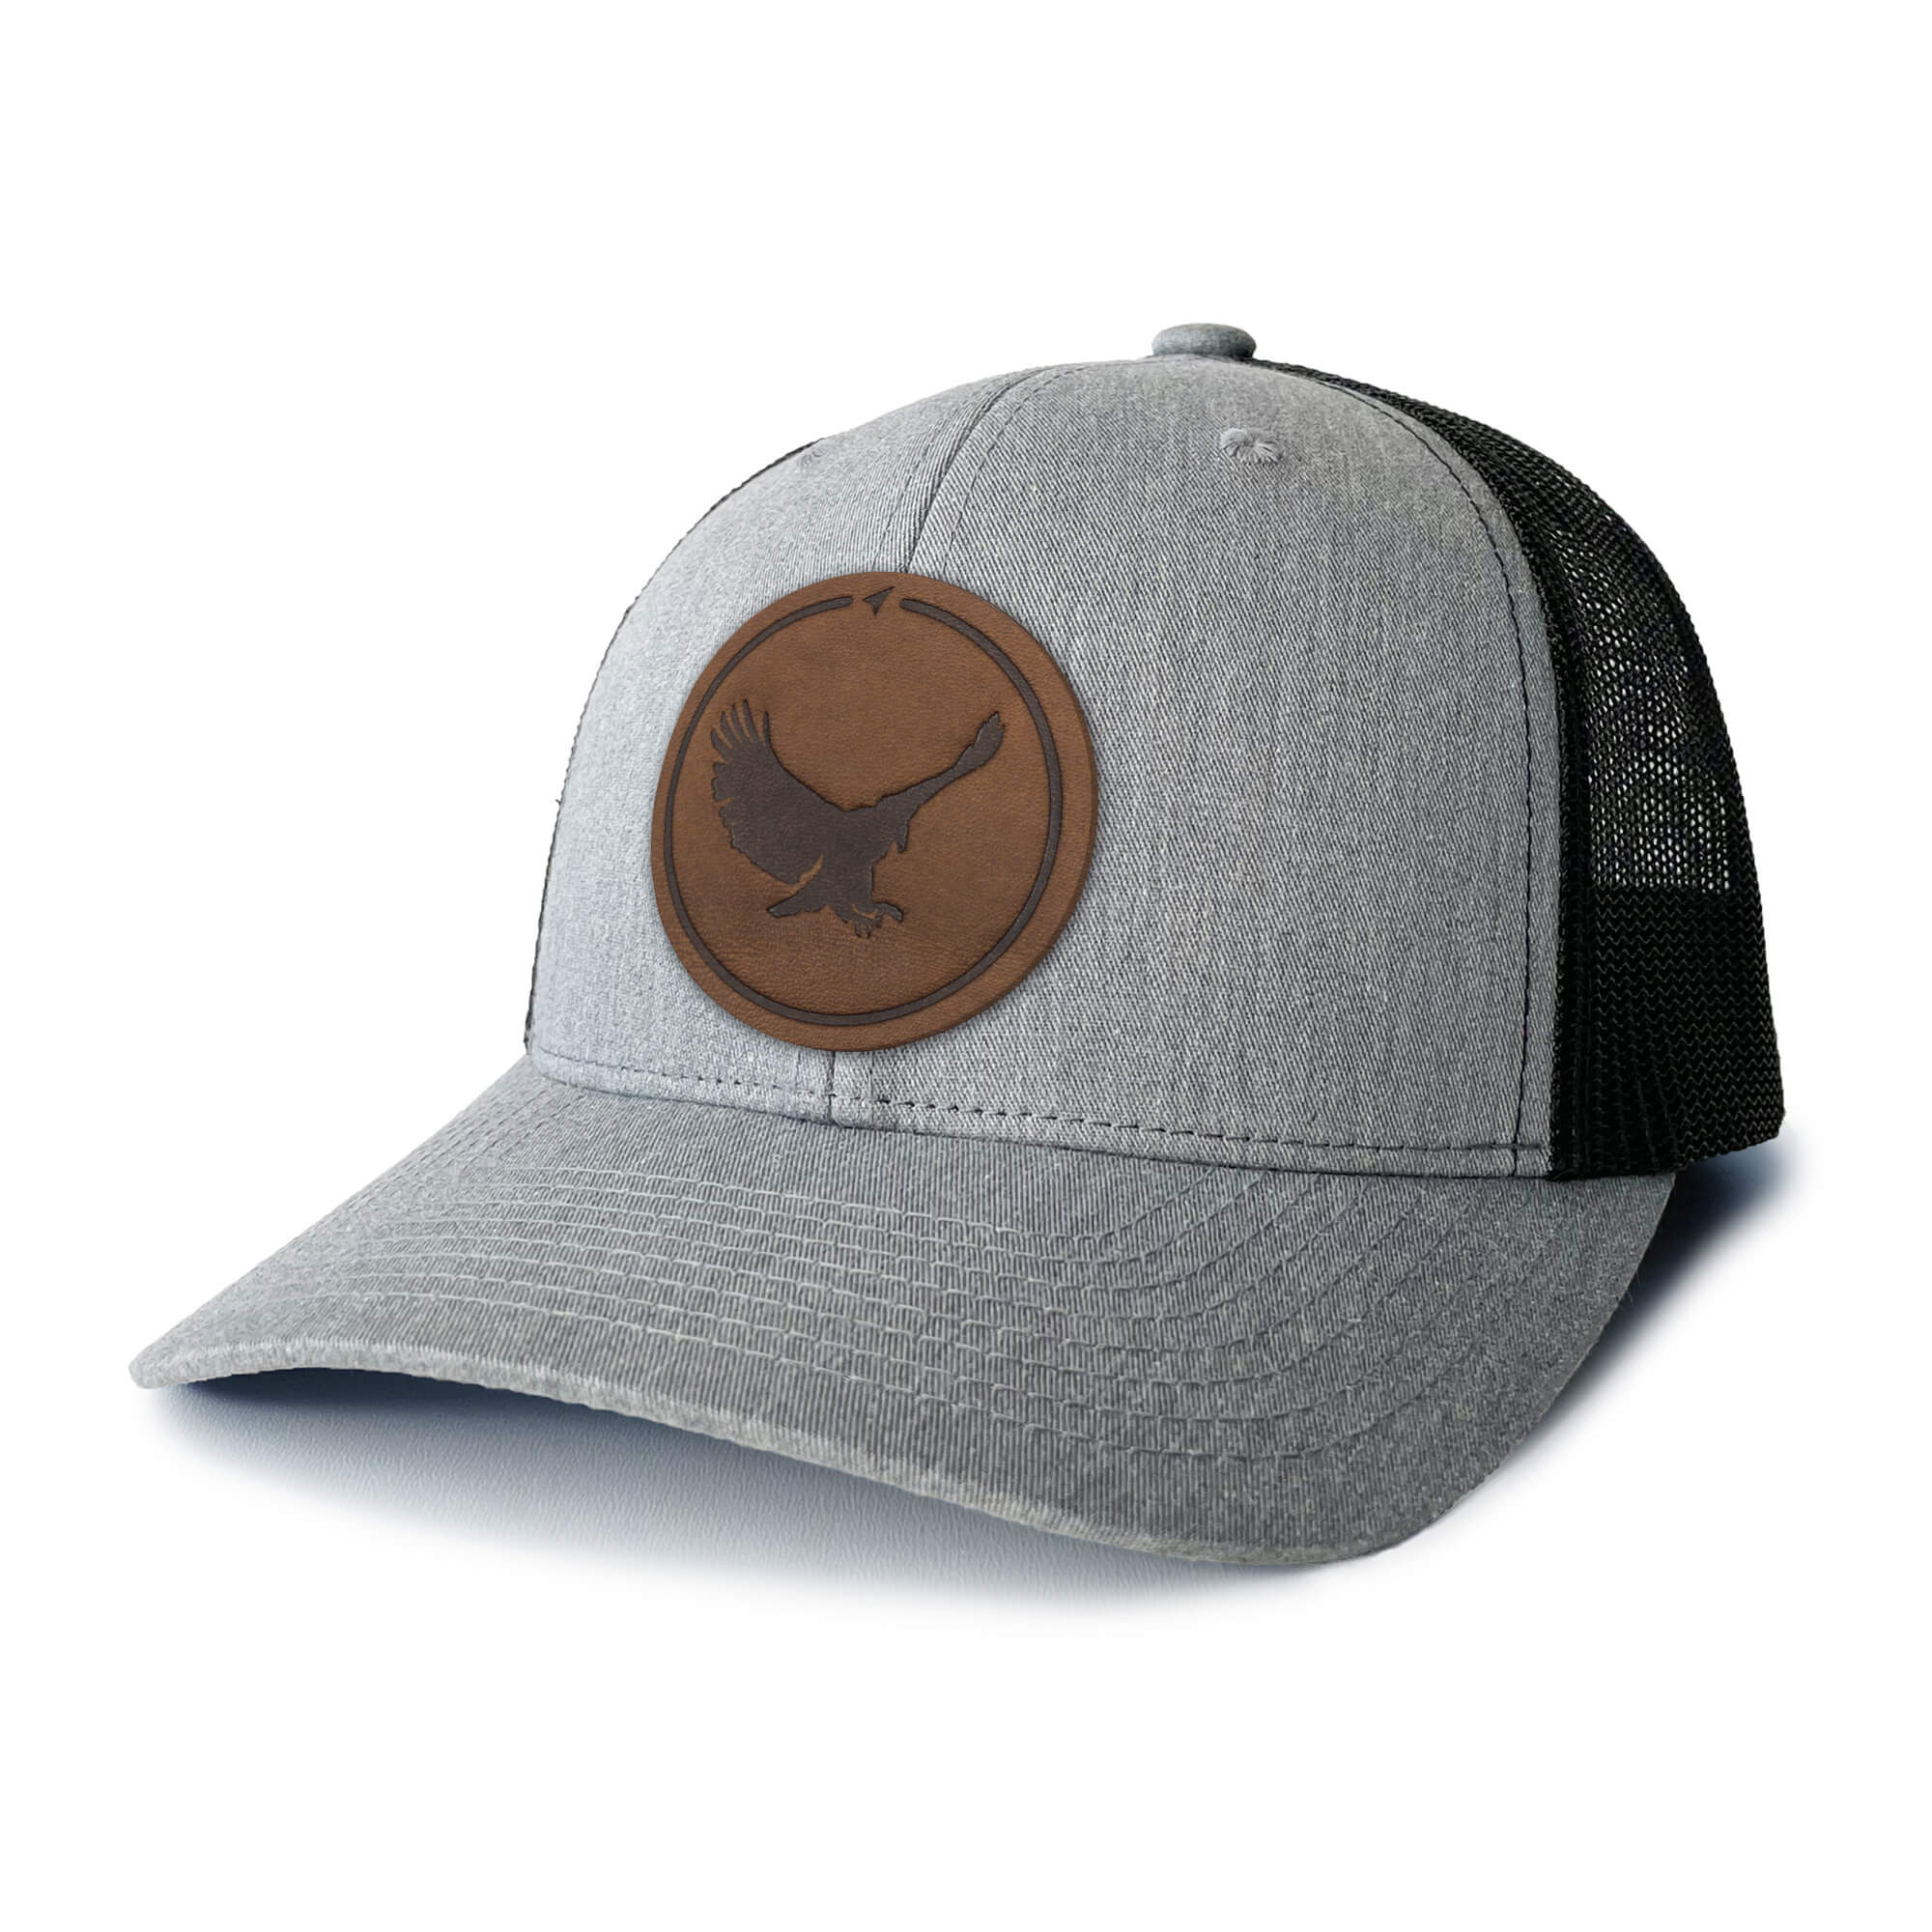 Heather Grey and white trucker hat with full-grain leather patch of an Eagle | BLACK-004-004, CHARC-004-004, NAVY-004-004, HGREY-004-004, MOSS-004-004, BROWN-004-004